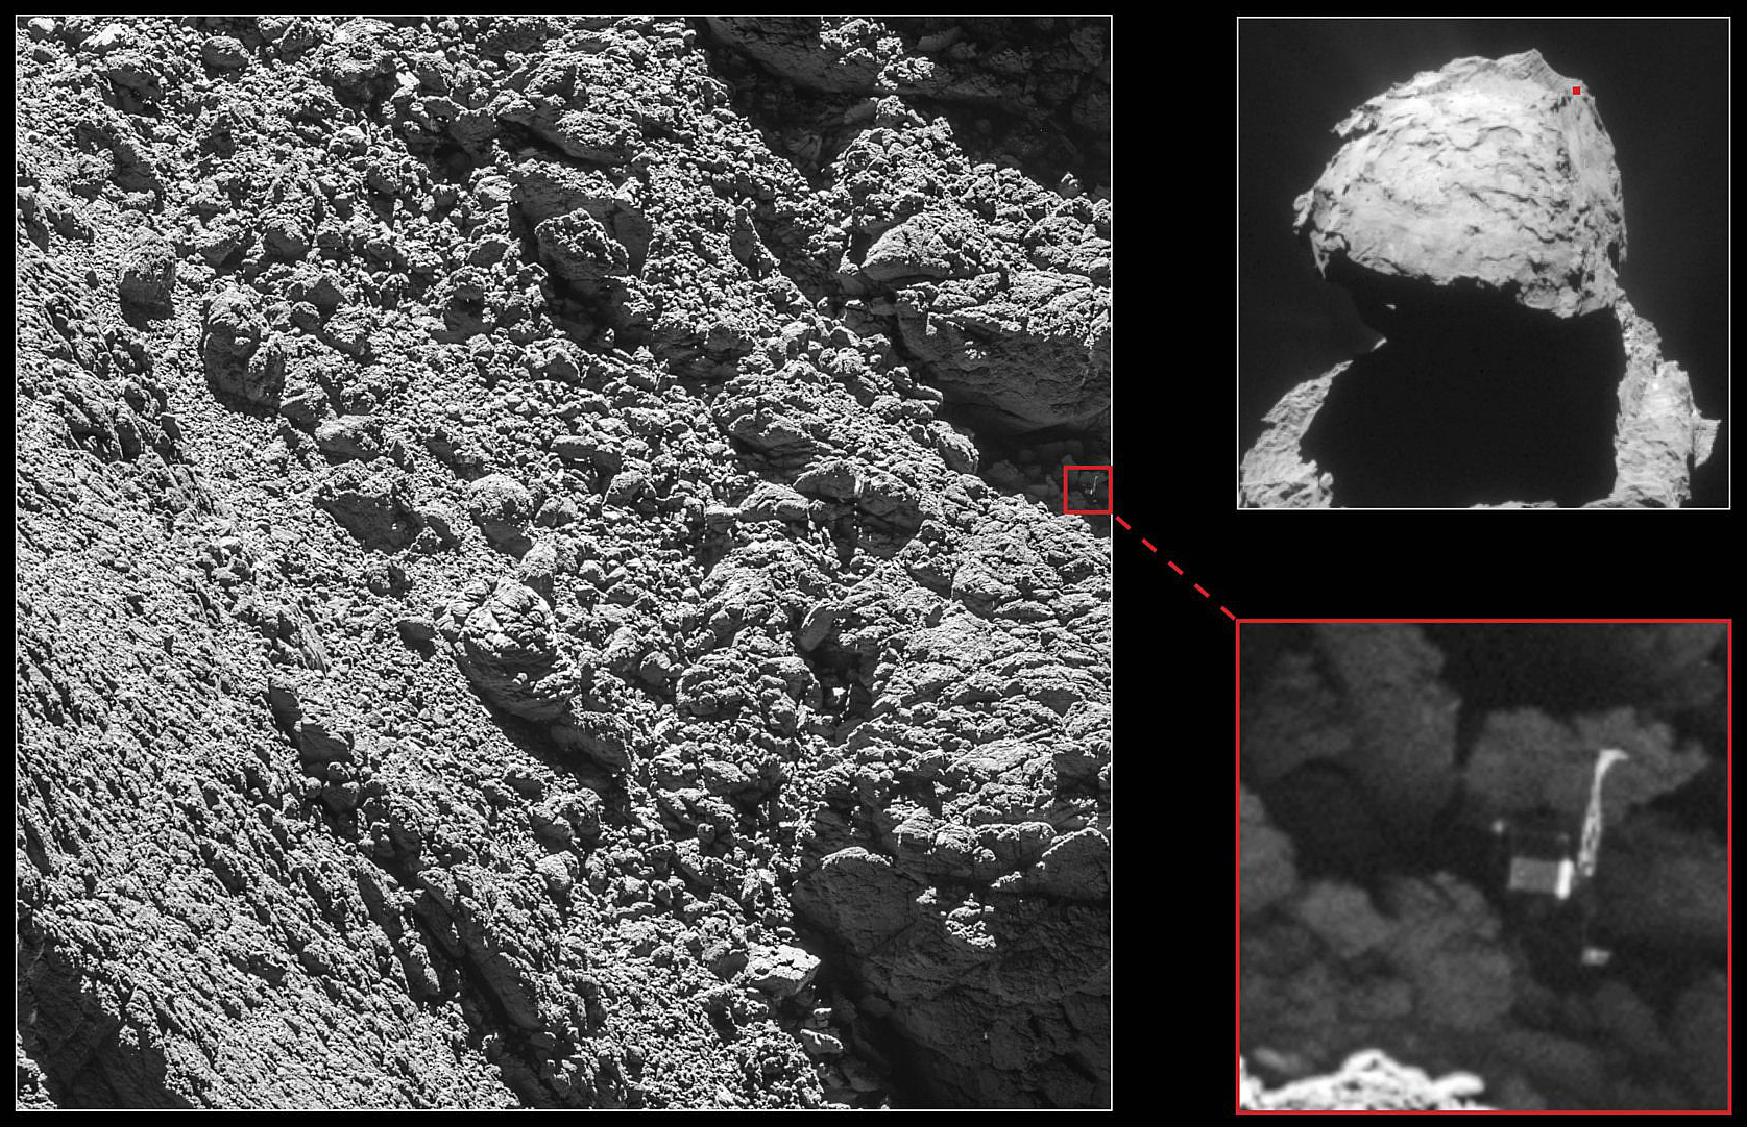 Figure 105: The images were taken on 2 September by the OSIRIS narrow-angle camera as the orbiter came within 2.7 km of the surface and clearly show the main body of the lander, along with two of its three legs .The images also provide proof of Philae's orientation, making it clear why establishing communications was so difficult following its landing on 12 November 2014. (image credit: Main image and lander inset: ESA/Rosetta/MPS for OSIRIS Team MPS/UPD/LAM/IAA/SSO/INTA/UPM/DASP/IDA; context: ESA/Rosetta/ NavCam – CC BY-SA IGO 3.0)